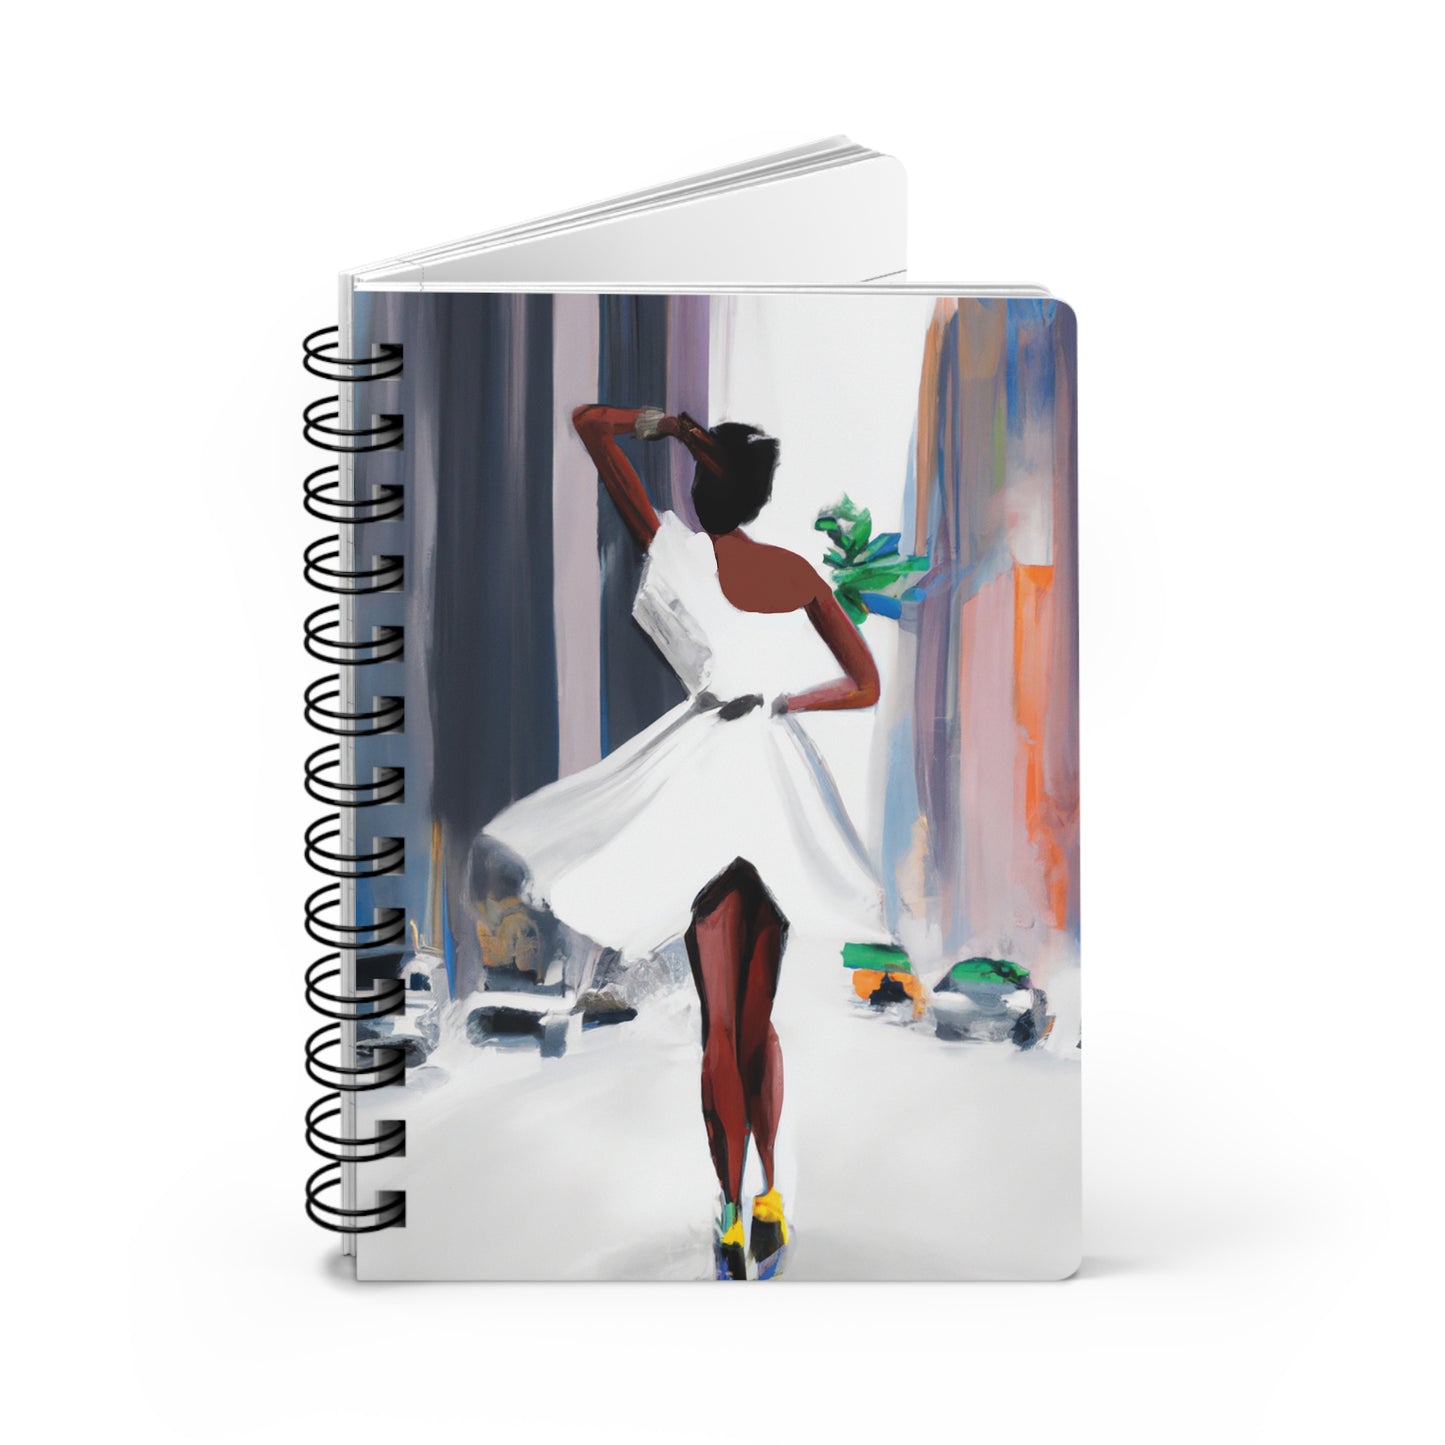 Platinum Spiral Bound Notebooks and Journals with 2023-2024 Year-at-a-Glance Calendar